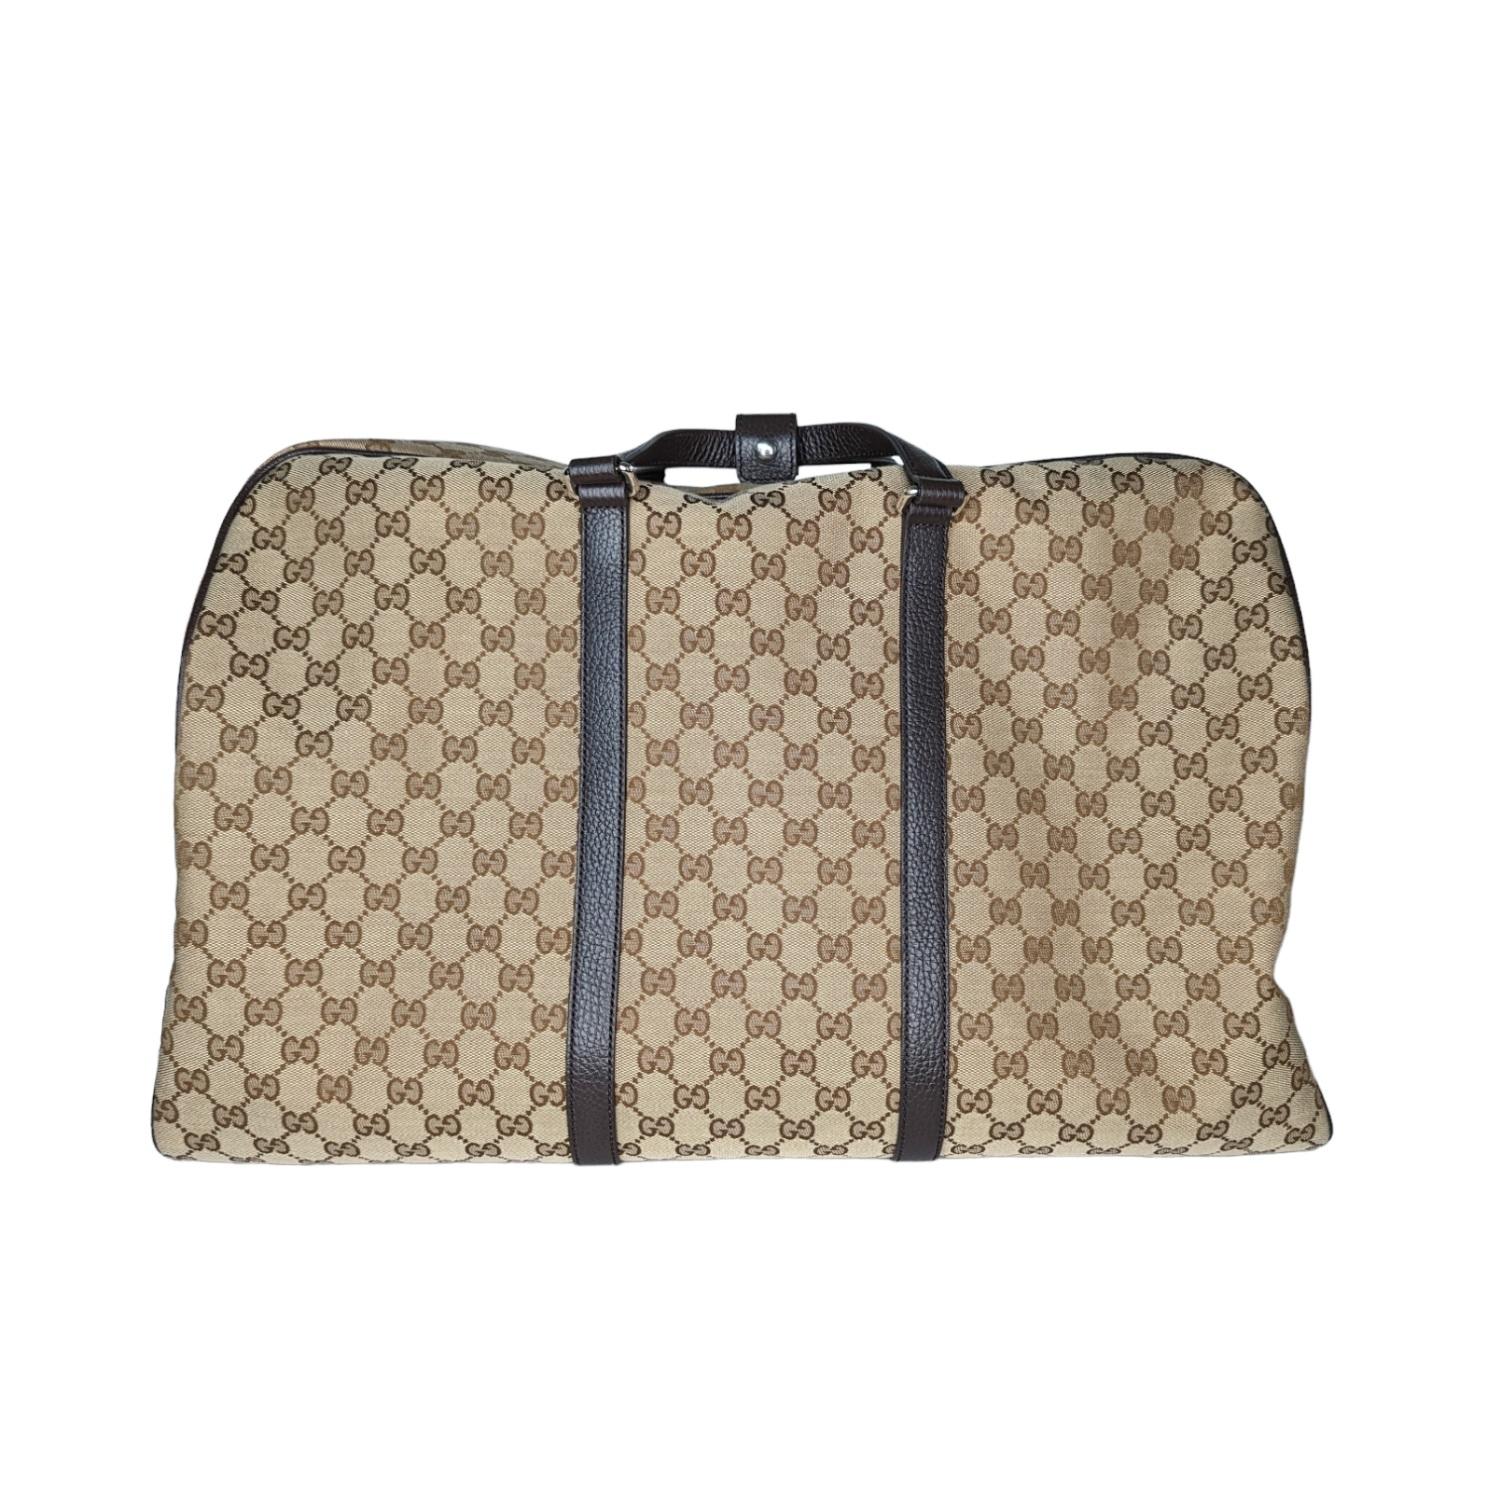 This stylish duffel is crafted of Gucci GG monogram canvas. The bag features dark brown leather top handles and an optional canvas shoulder strap with silver hardware. The top zipper opens to a spacious fabric interior with zipper and patch